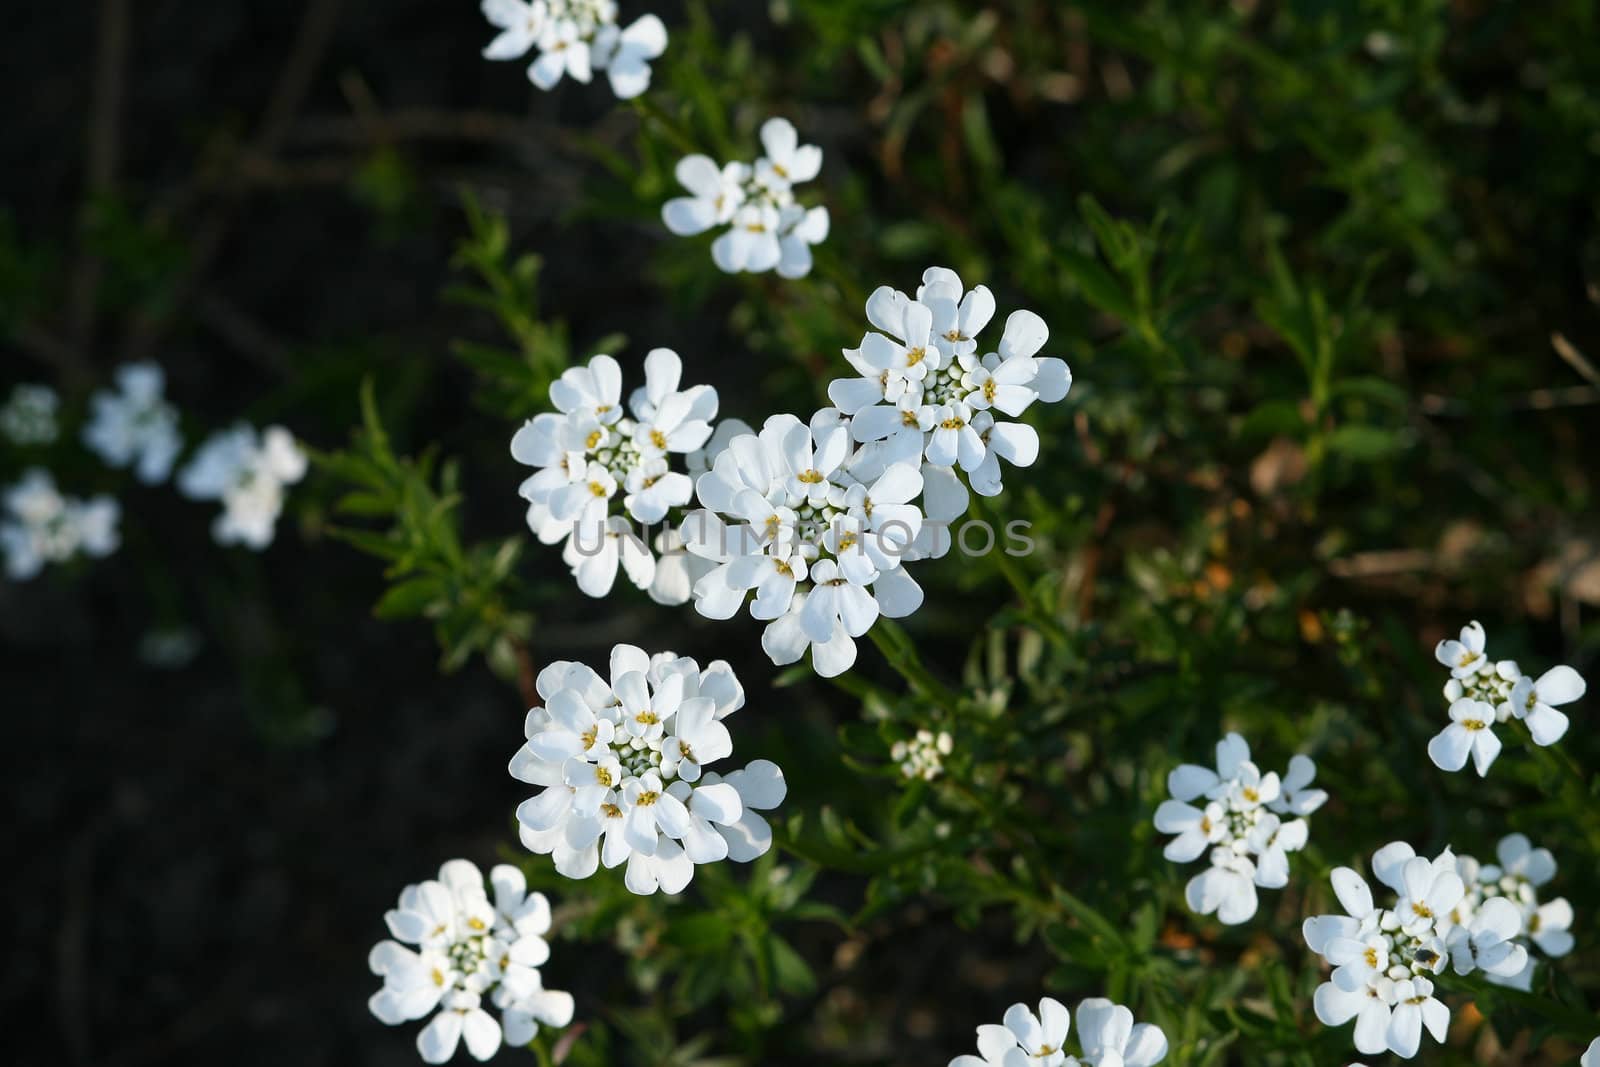 White flowers growing in the garden during spring